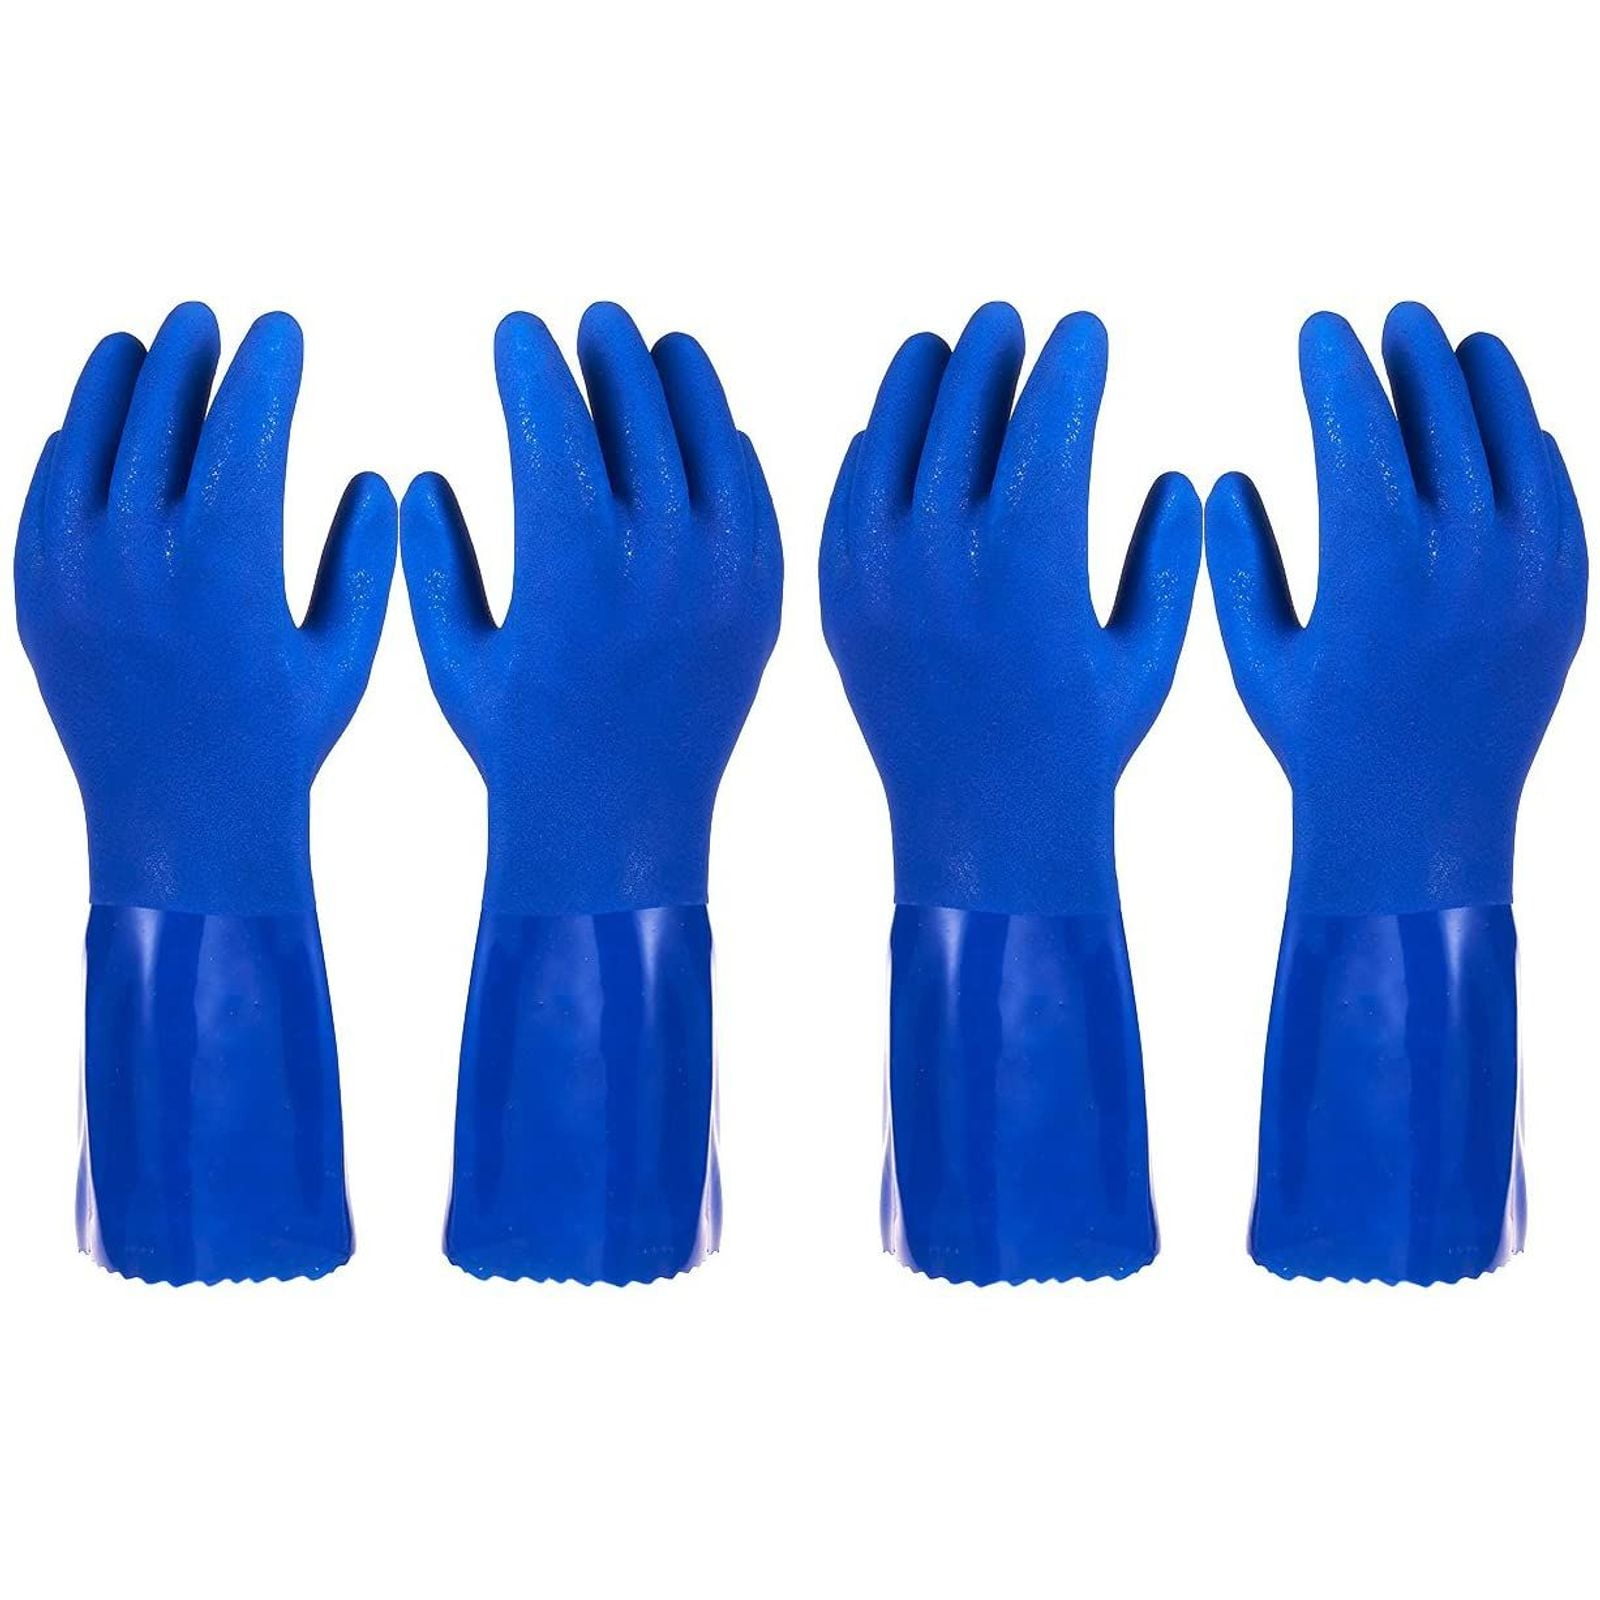 Kitchen Household long sleeve Gloves Washing Dishes Etc Rubber, Size M four 4 